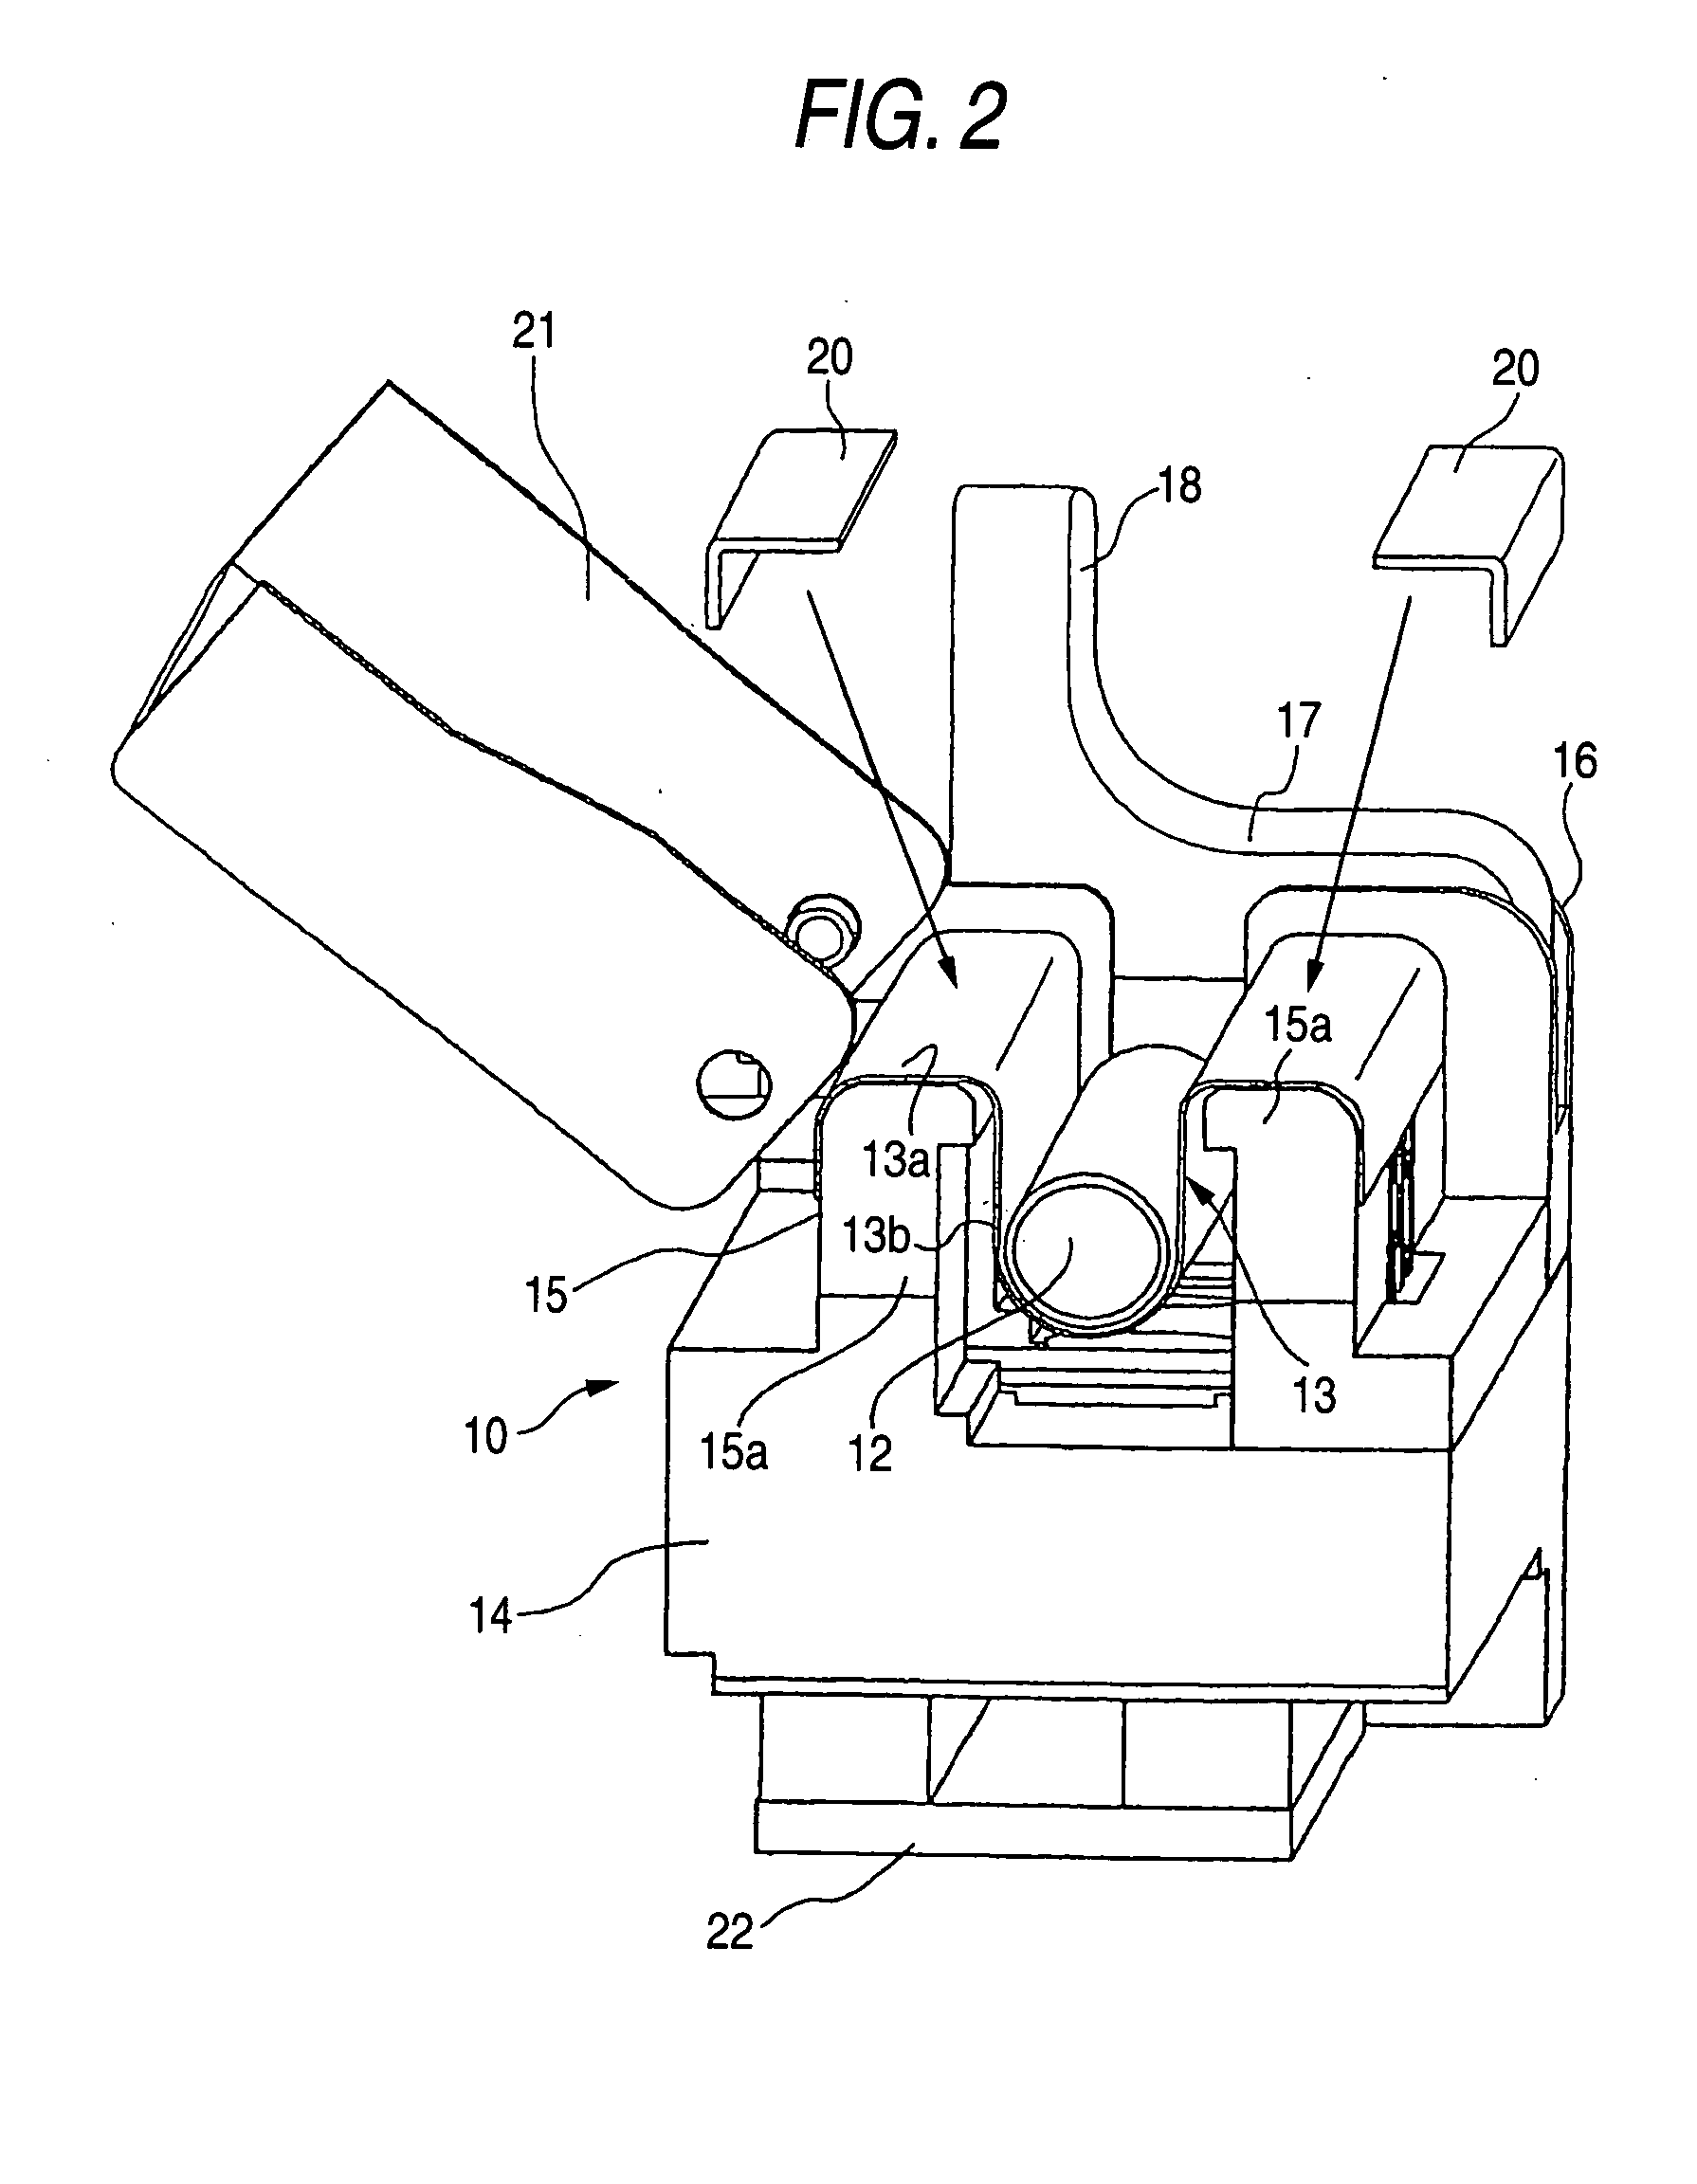 Apparatus and method for heat-treatment of optical fiber reinforcing member and optical fiber fusion splicing apparatus